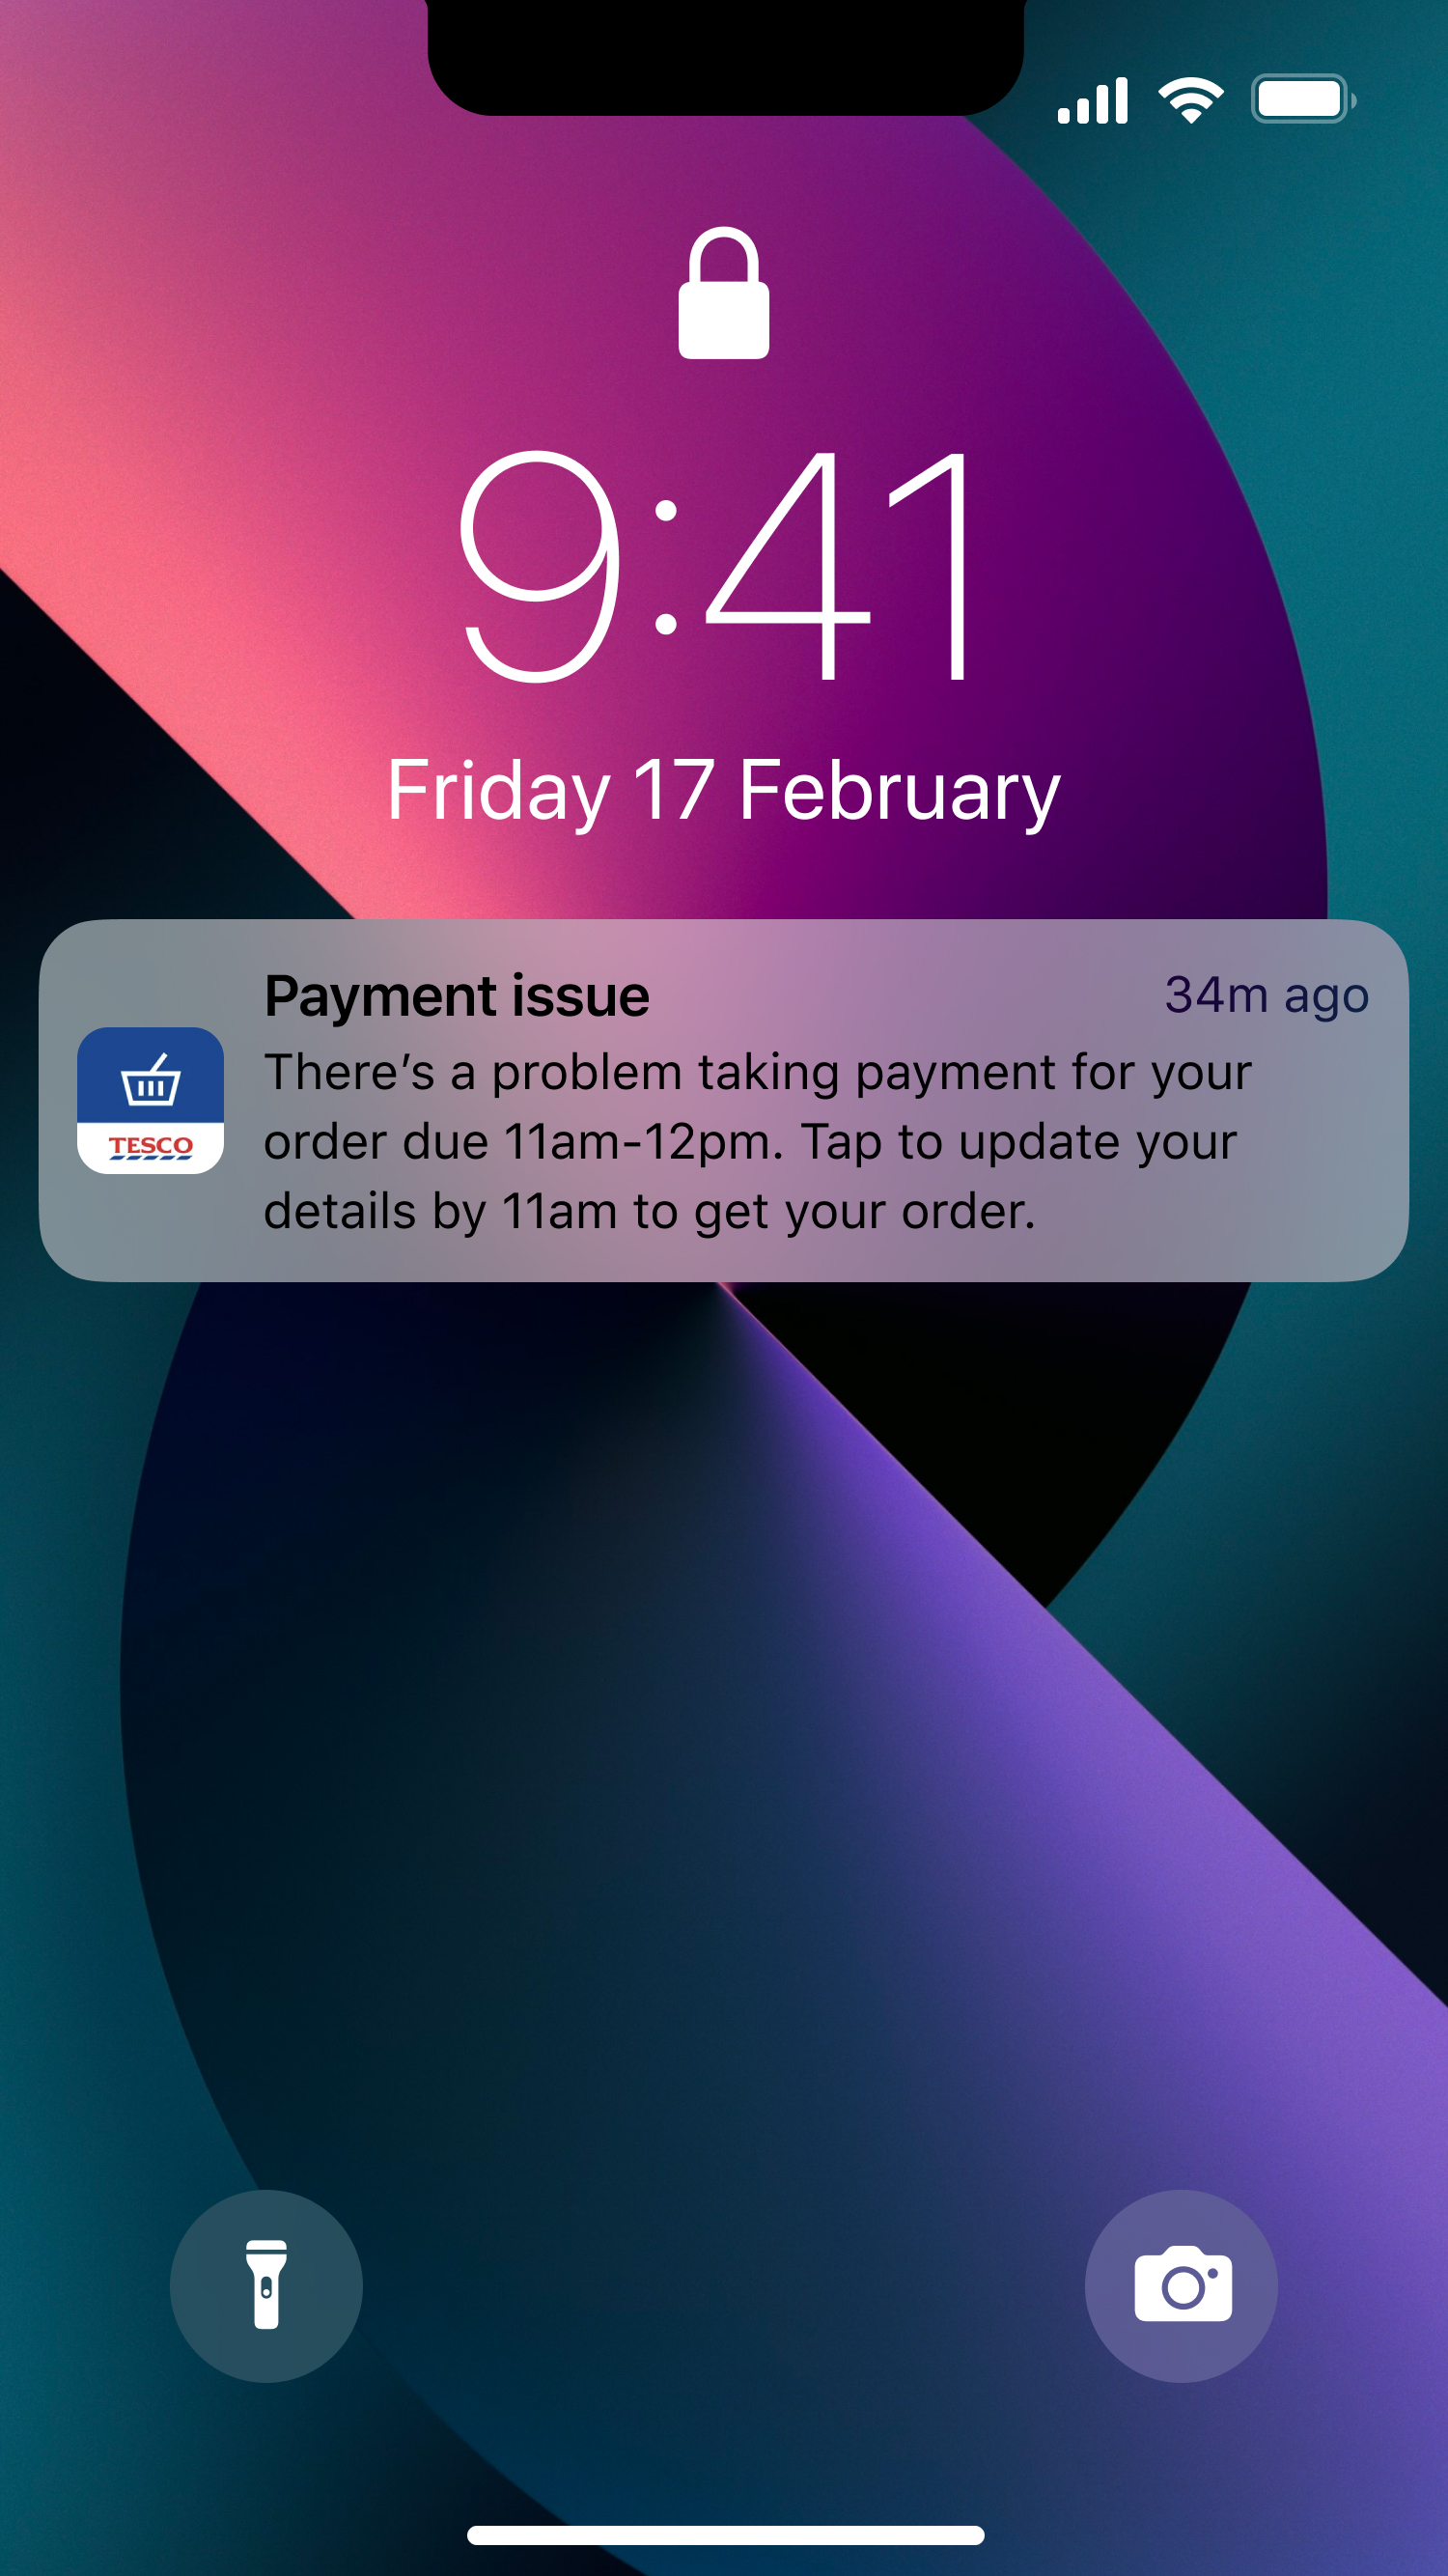 Failed payment push notification